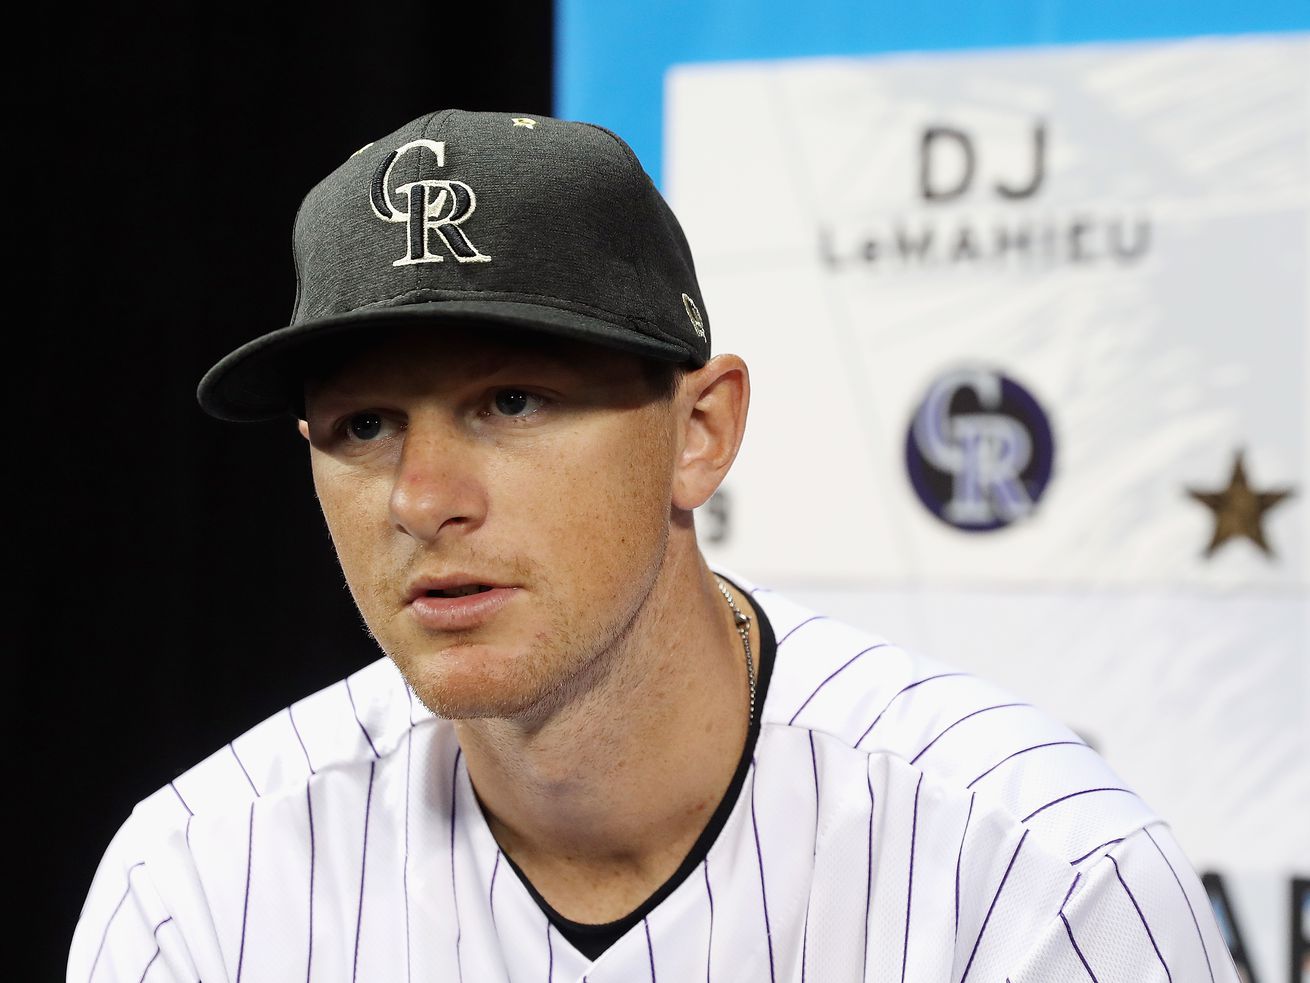 DJ LeMahieu went on to become a Gold Glove winner, two-time All-Star and batting champion for the Rockies.